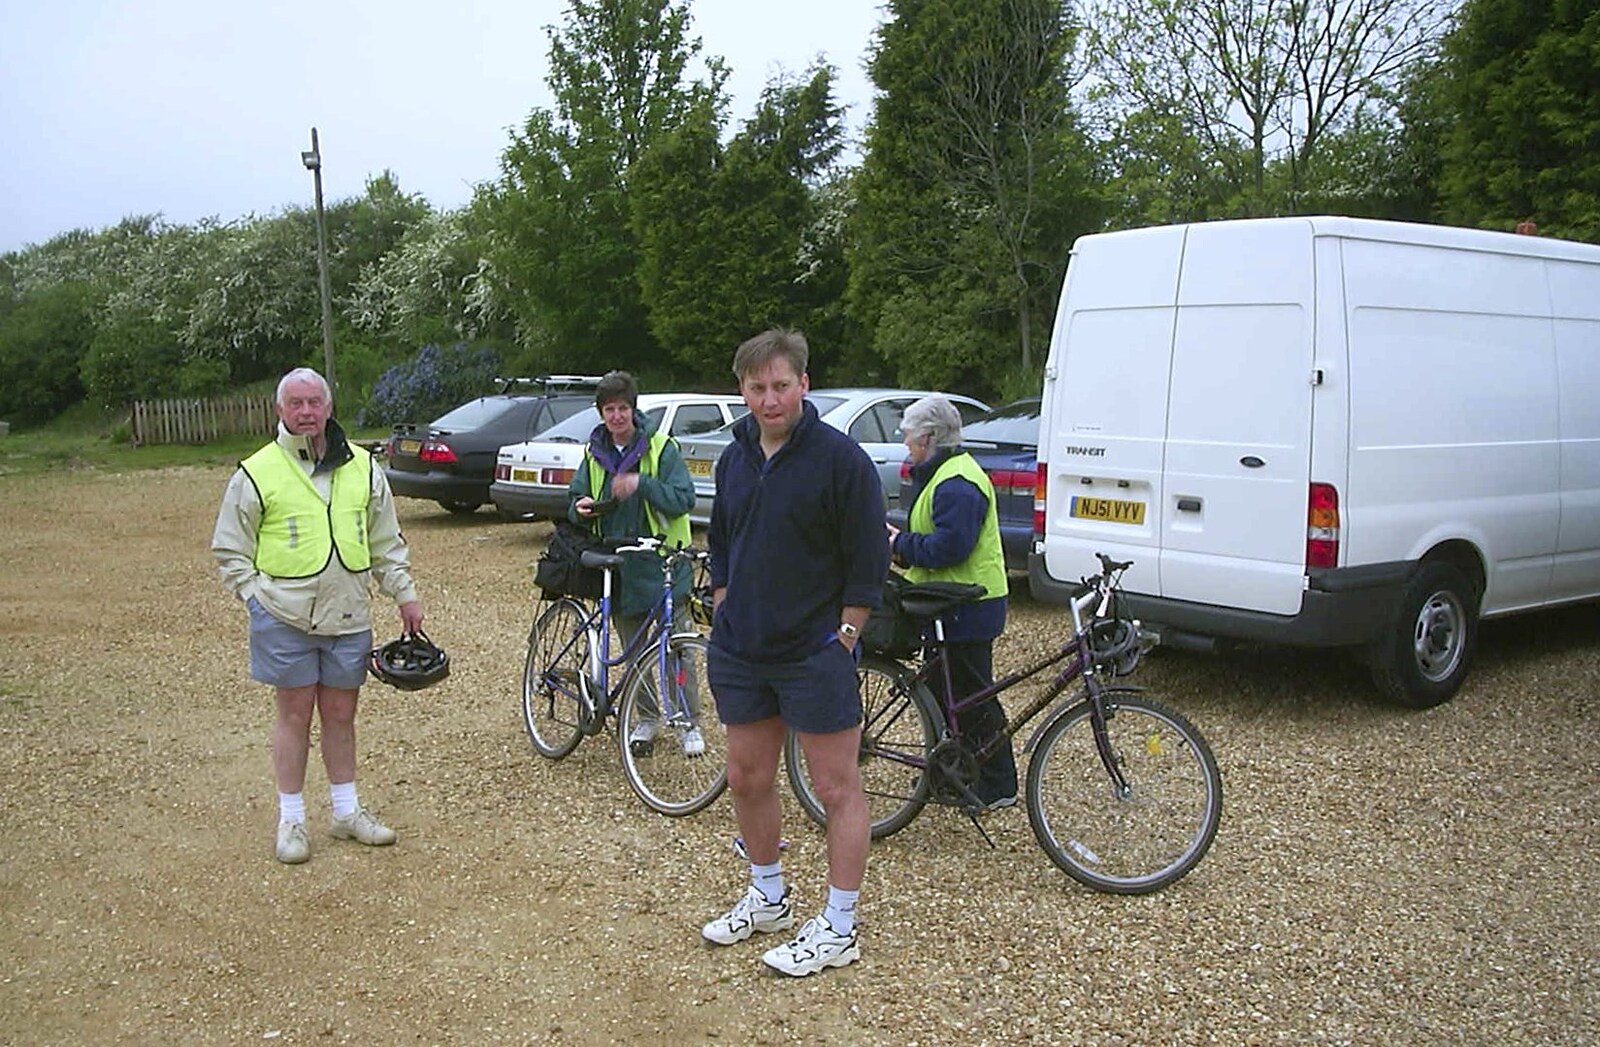 The BSCC Bike Ride, Shefford, Bedford - 11th May 2002: Colin and Nigel